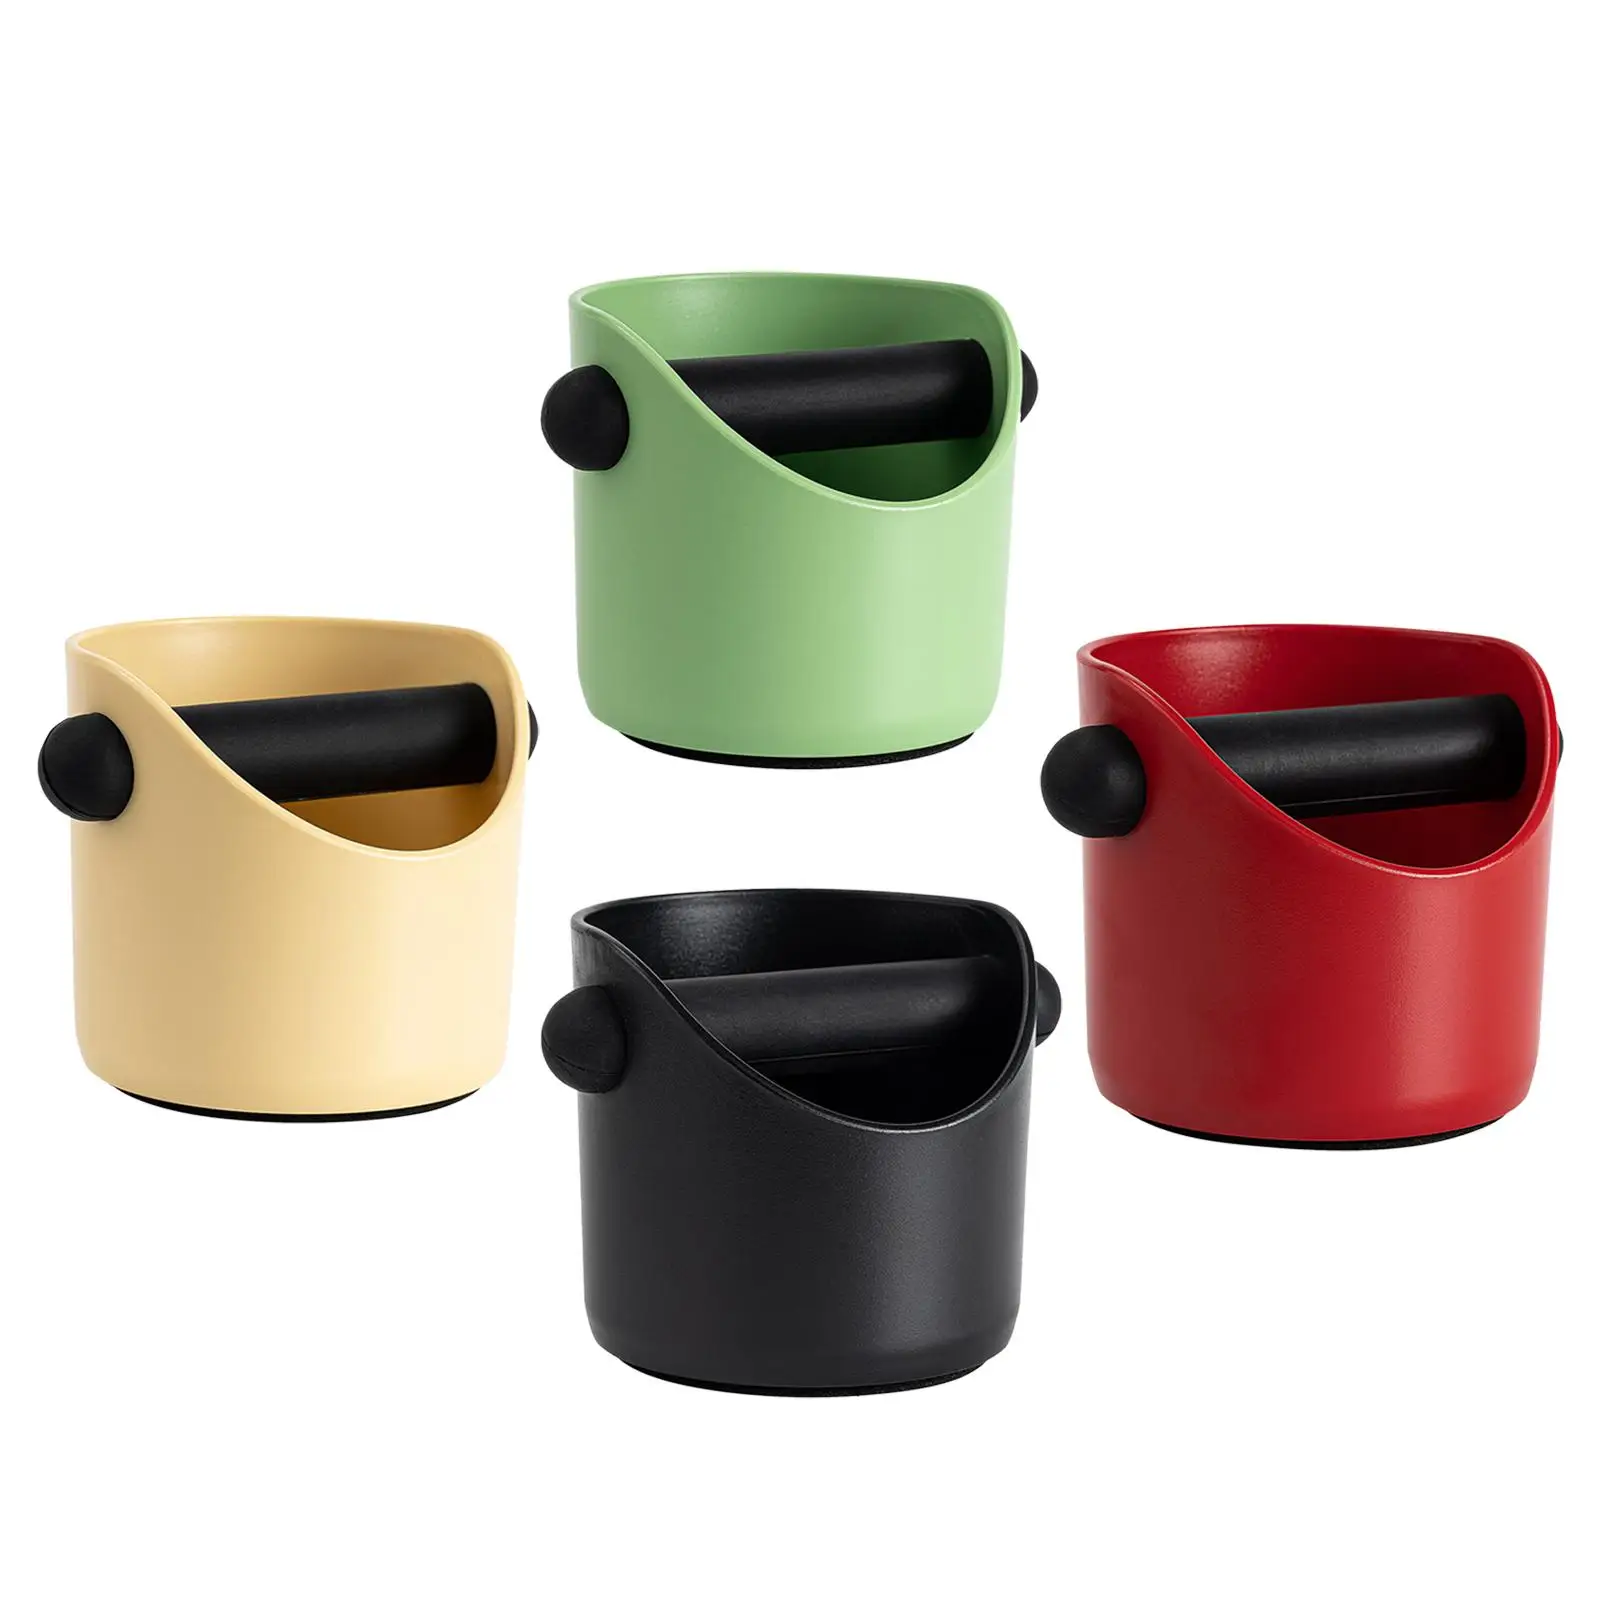 Espresso Dump Bin with Removable Knock Rod Shock Absorbent Trash Can Barista Style Compact Espresso Bucket for Kitchen